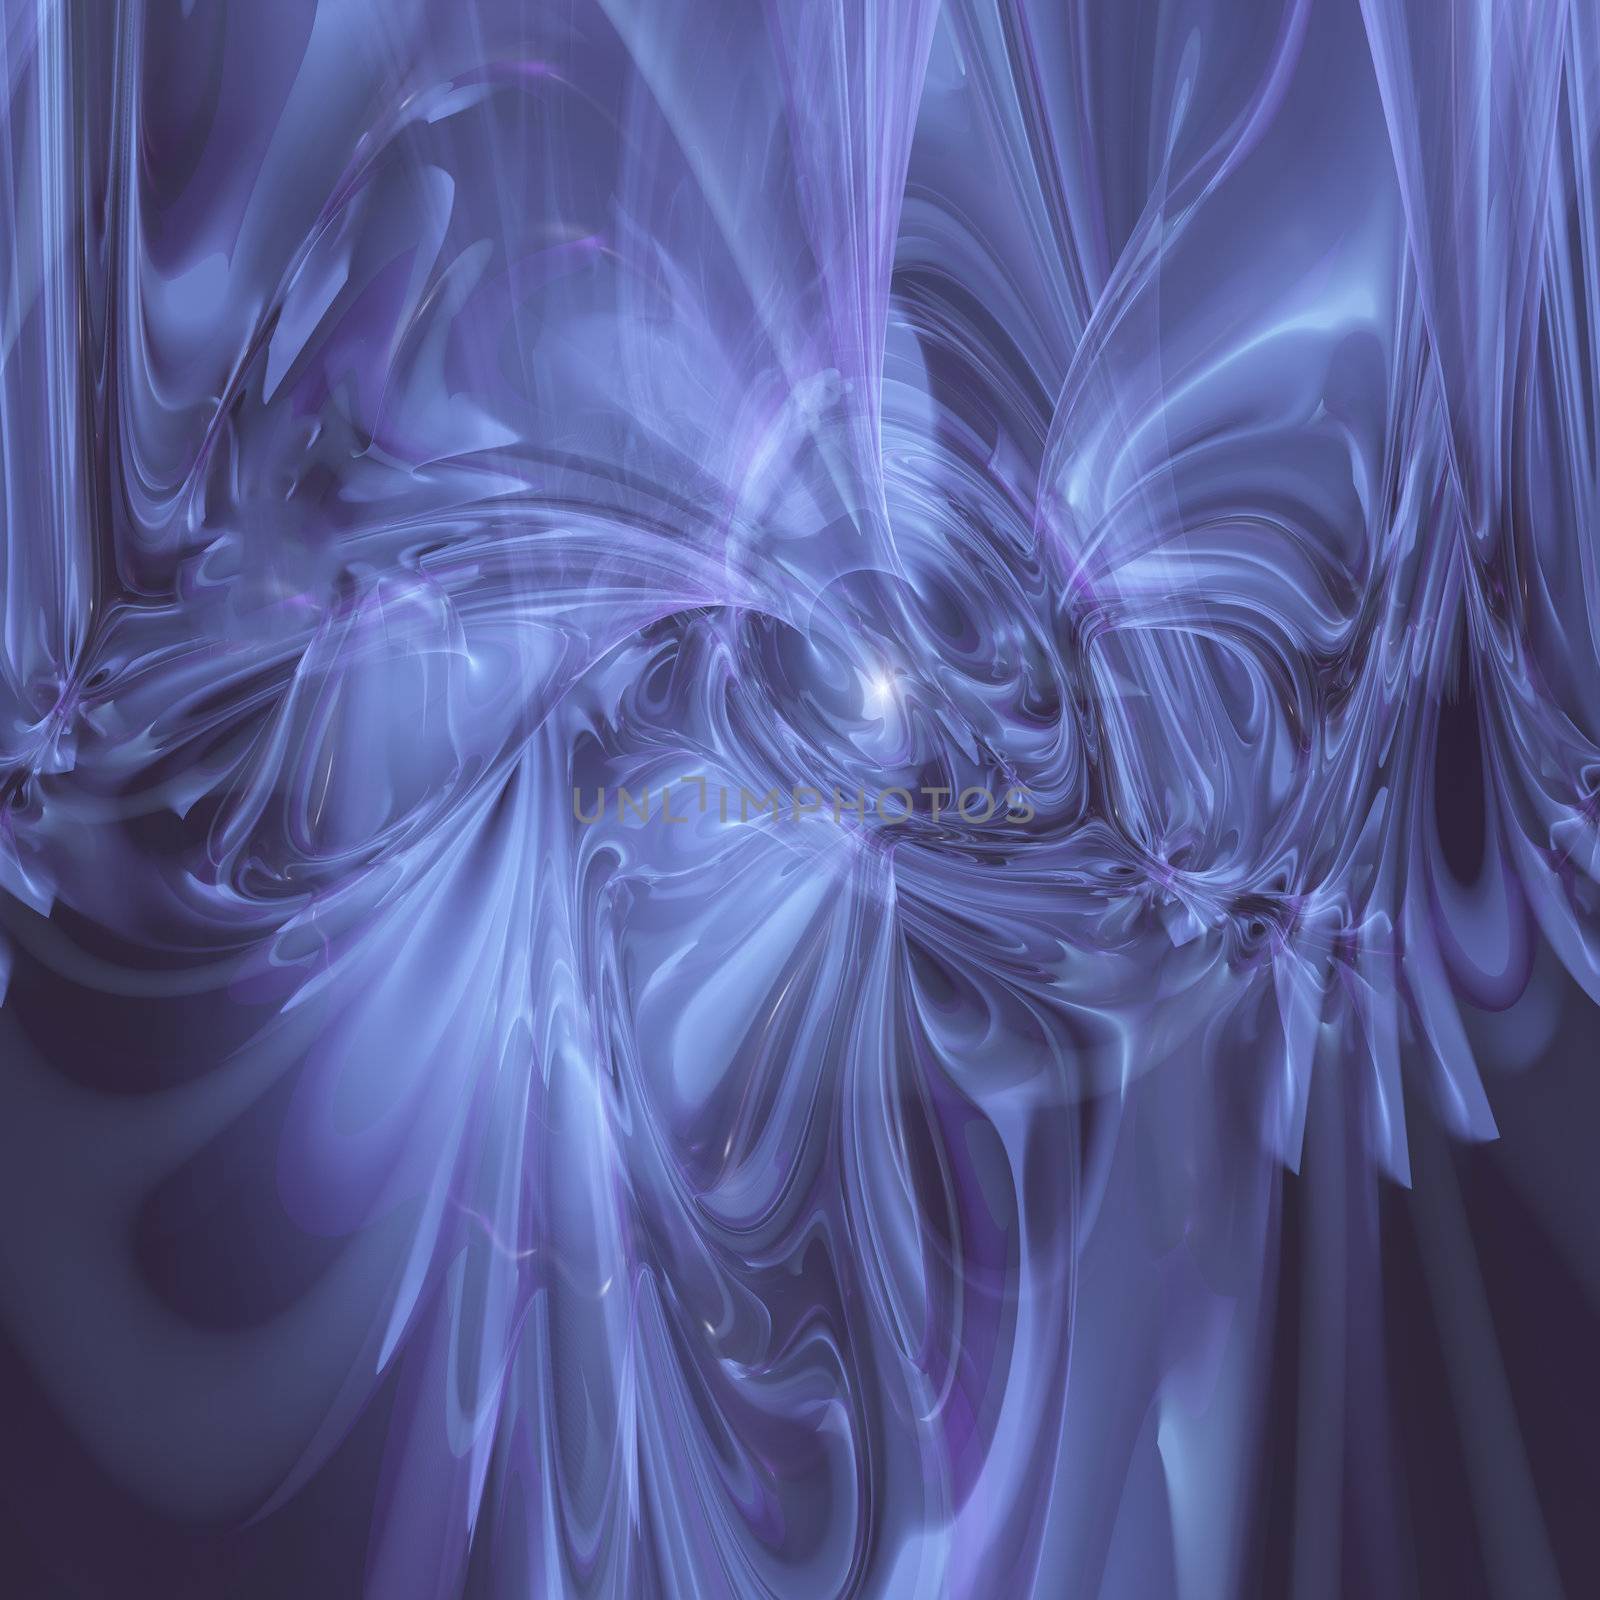 Violet ruffles background by truelight